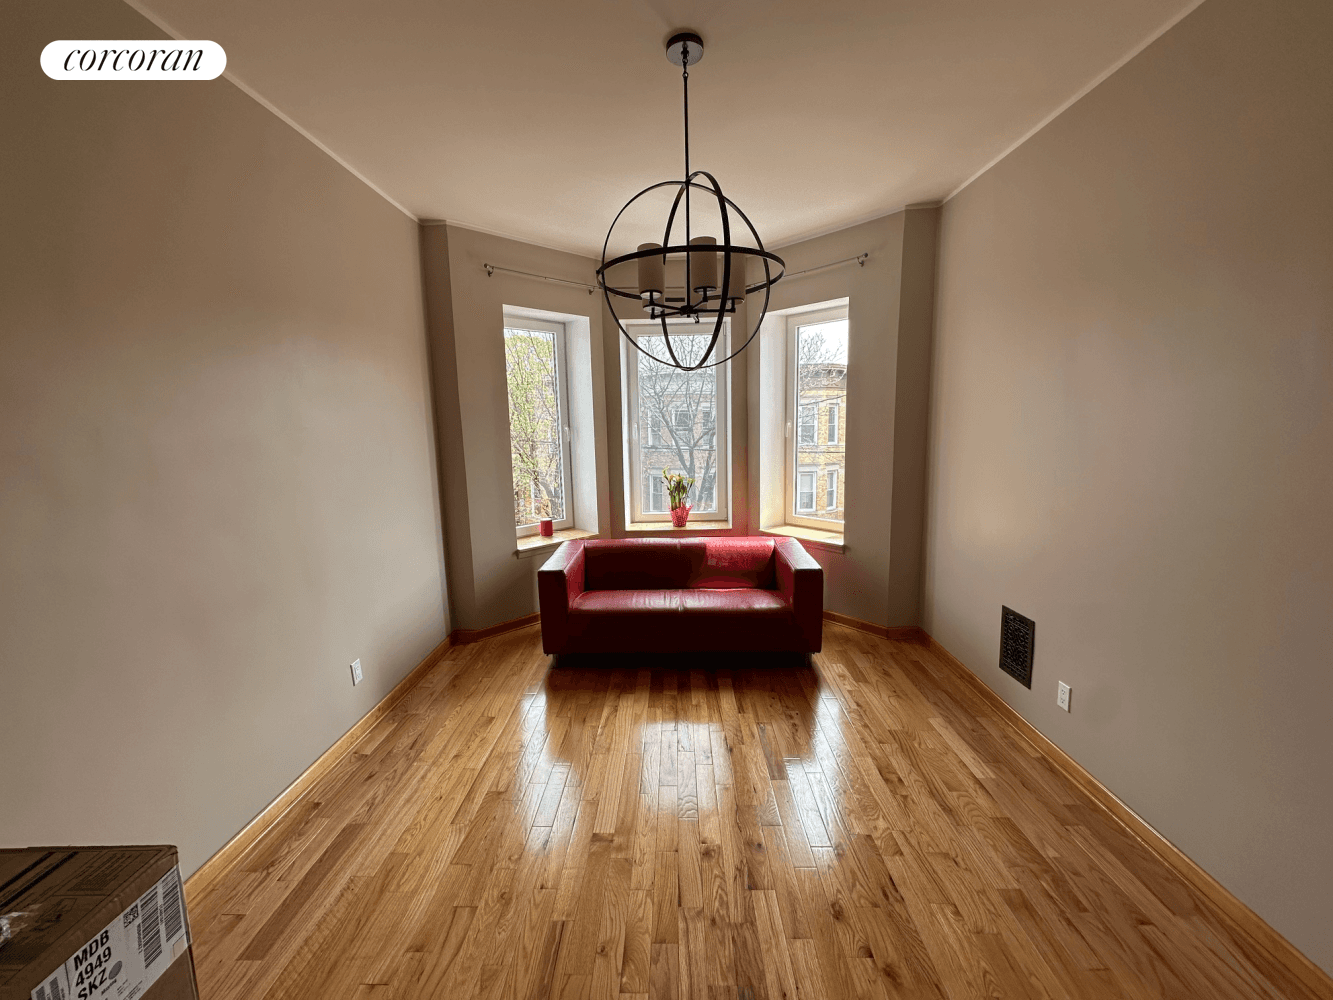 SPACIOUS 3 BED 1 BATH IN RIDGEWOOD GLENDALESpacious 3 bedroom apartment offers a perfect blend of modern comfort and classic charm located on a quiet street in Ridgewood Glendale.